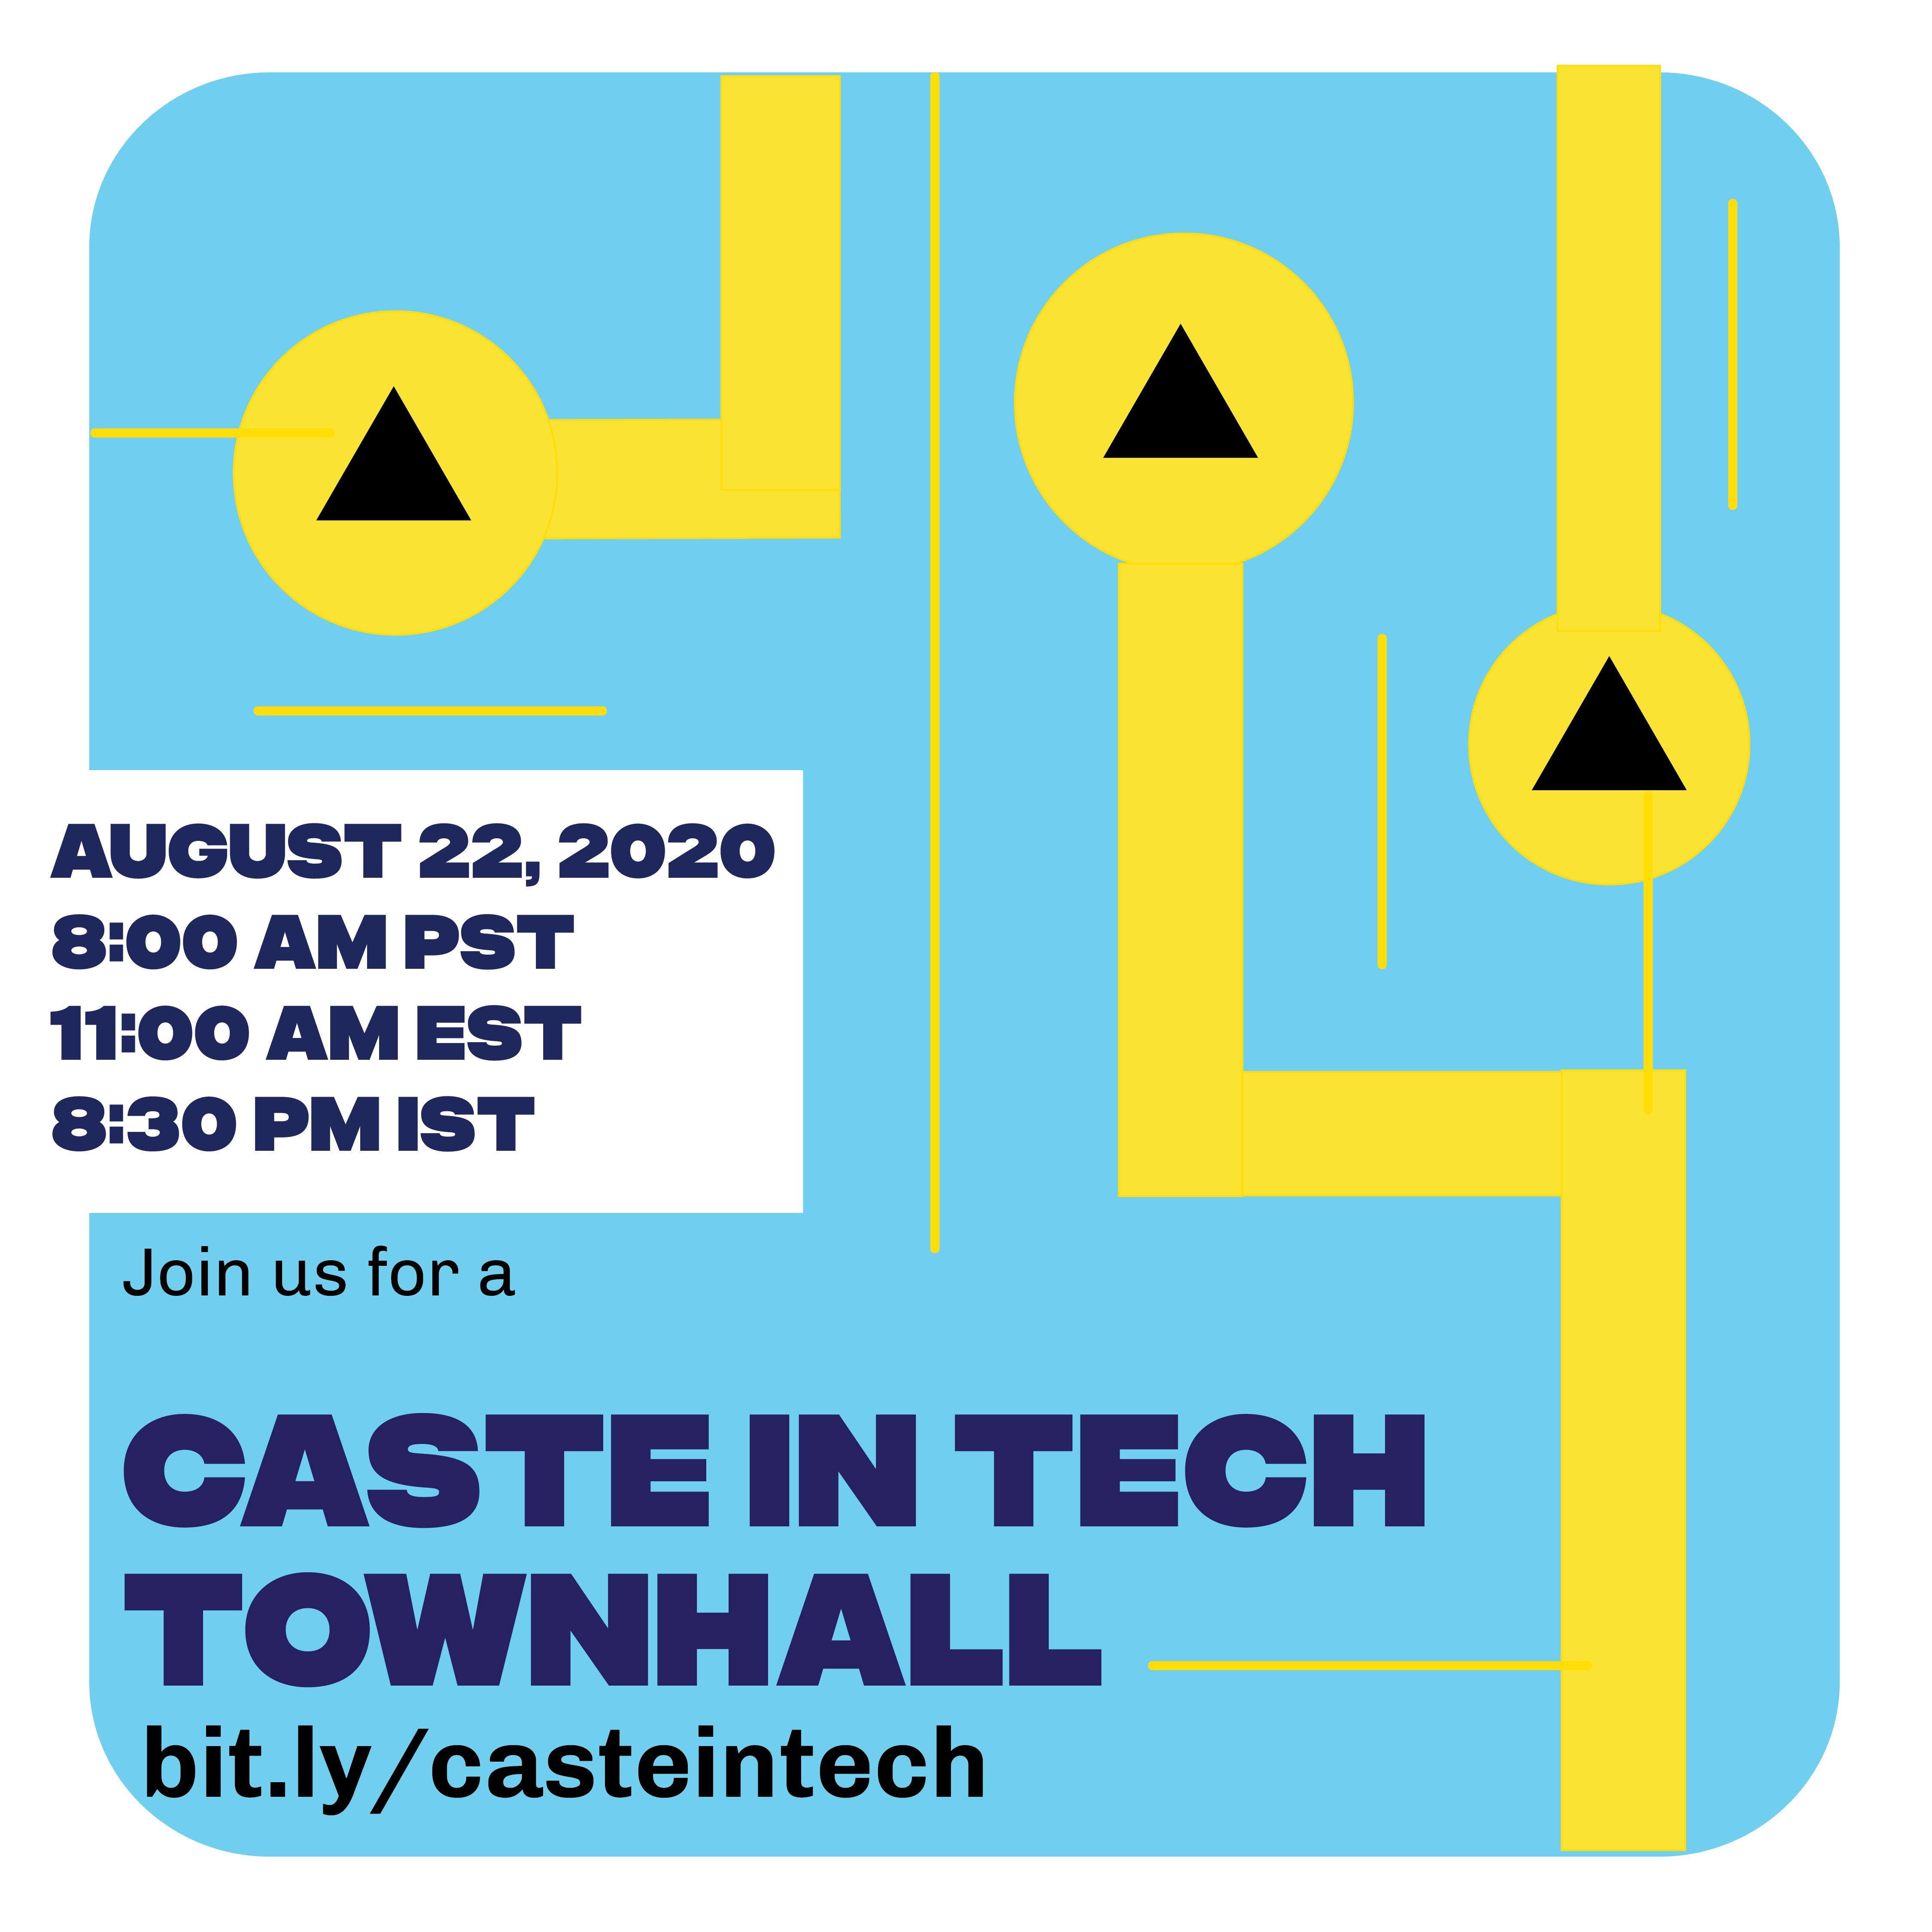 Cast in Tech Townhall flyer - August 22, 2020